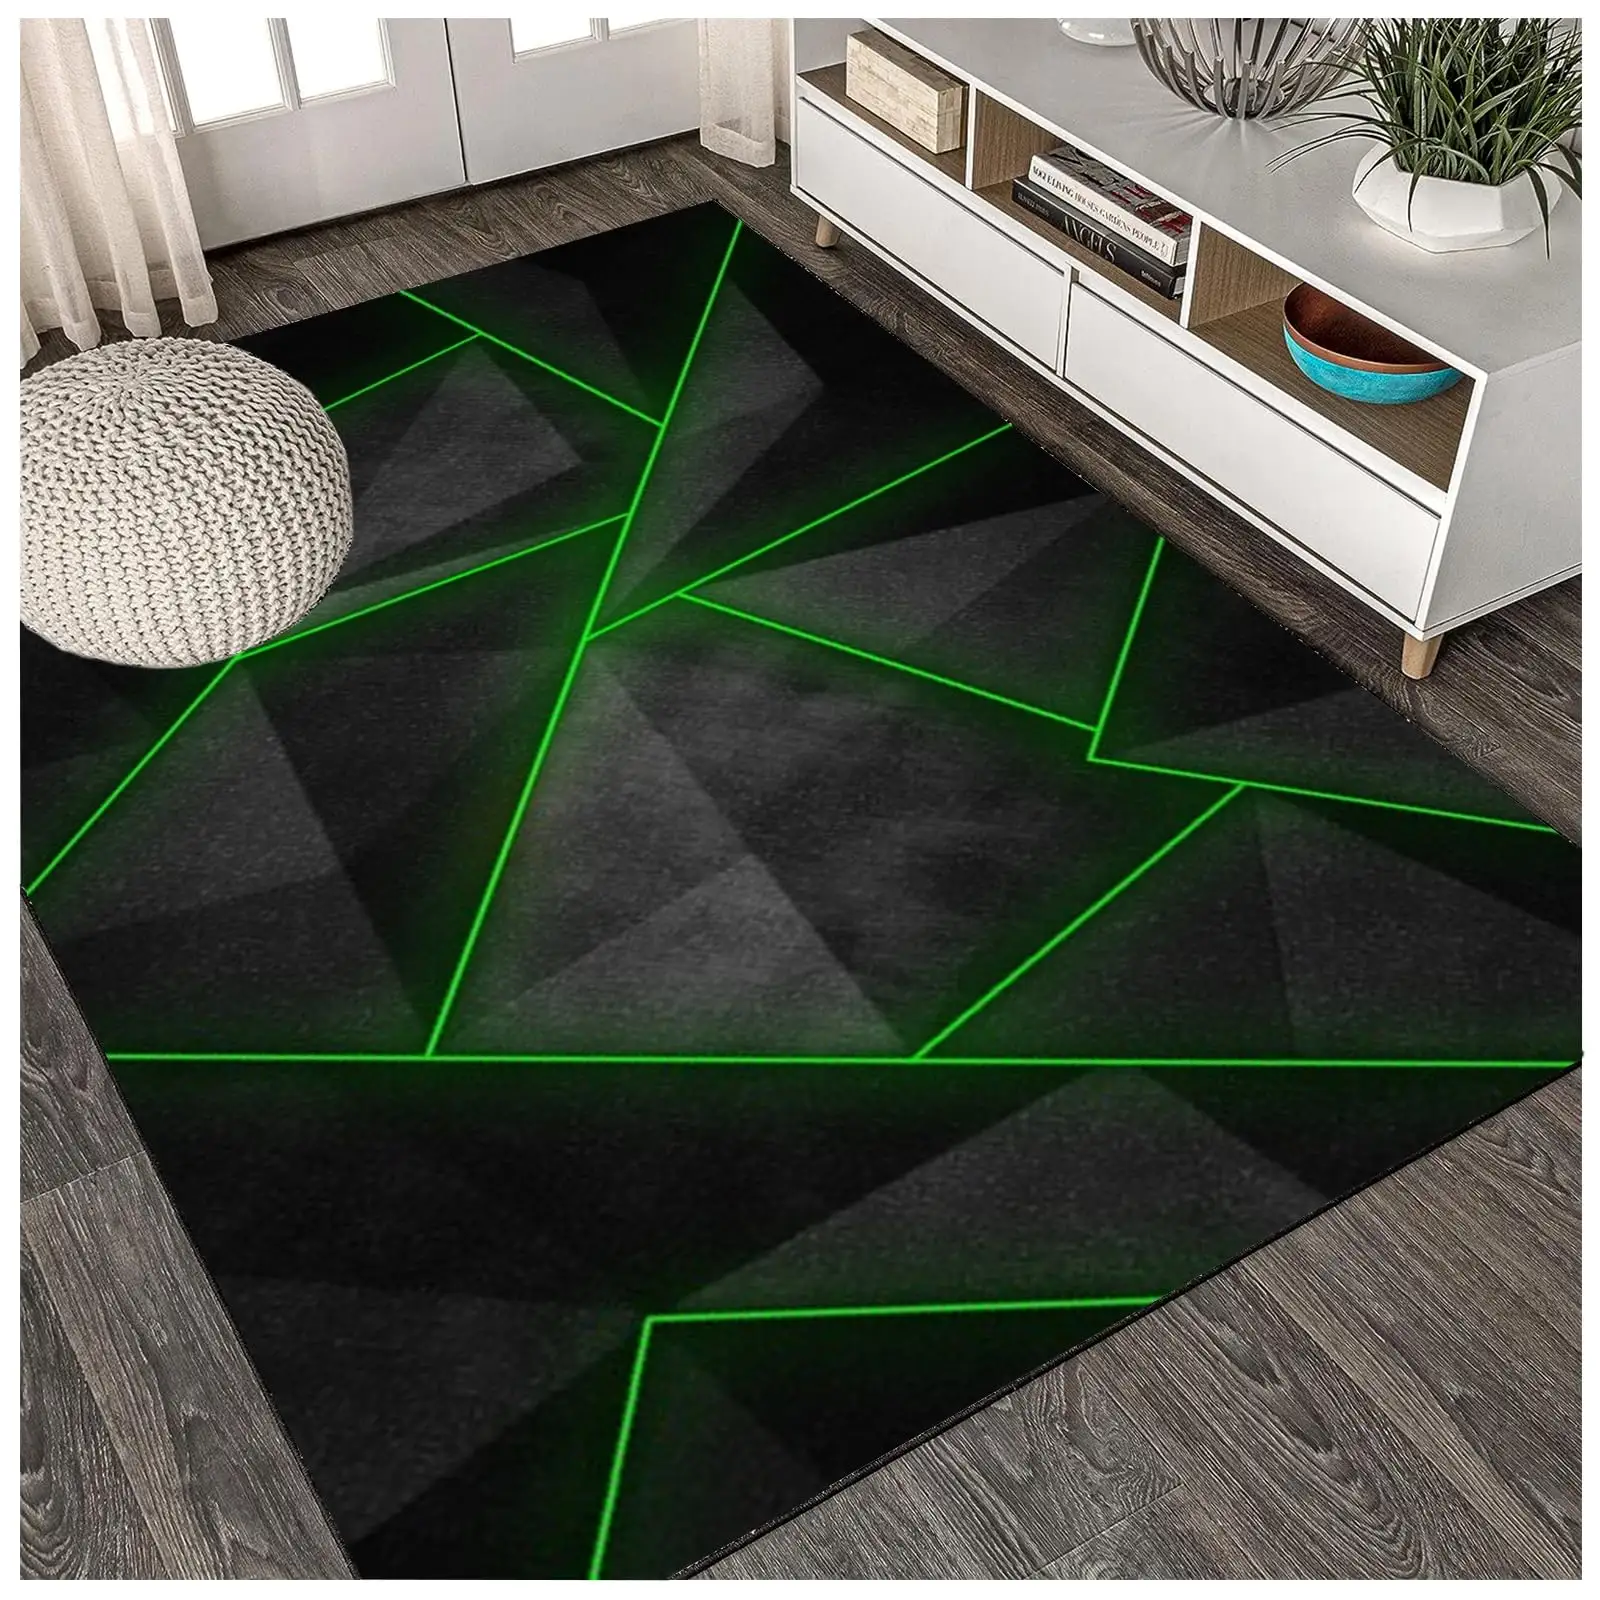 3D Printing Triangles Printing Non Slip Washable Carpet Area Rug Home Bedroom Kitchen Living Room Decor Aesthetic Door Mat